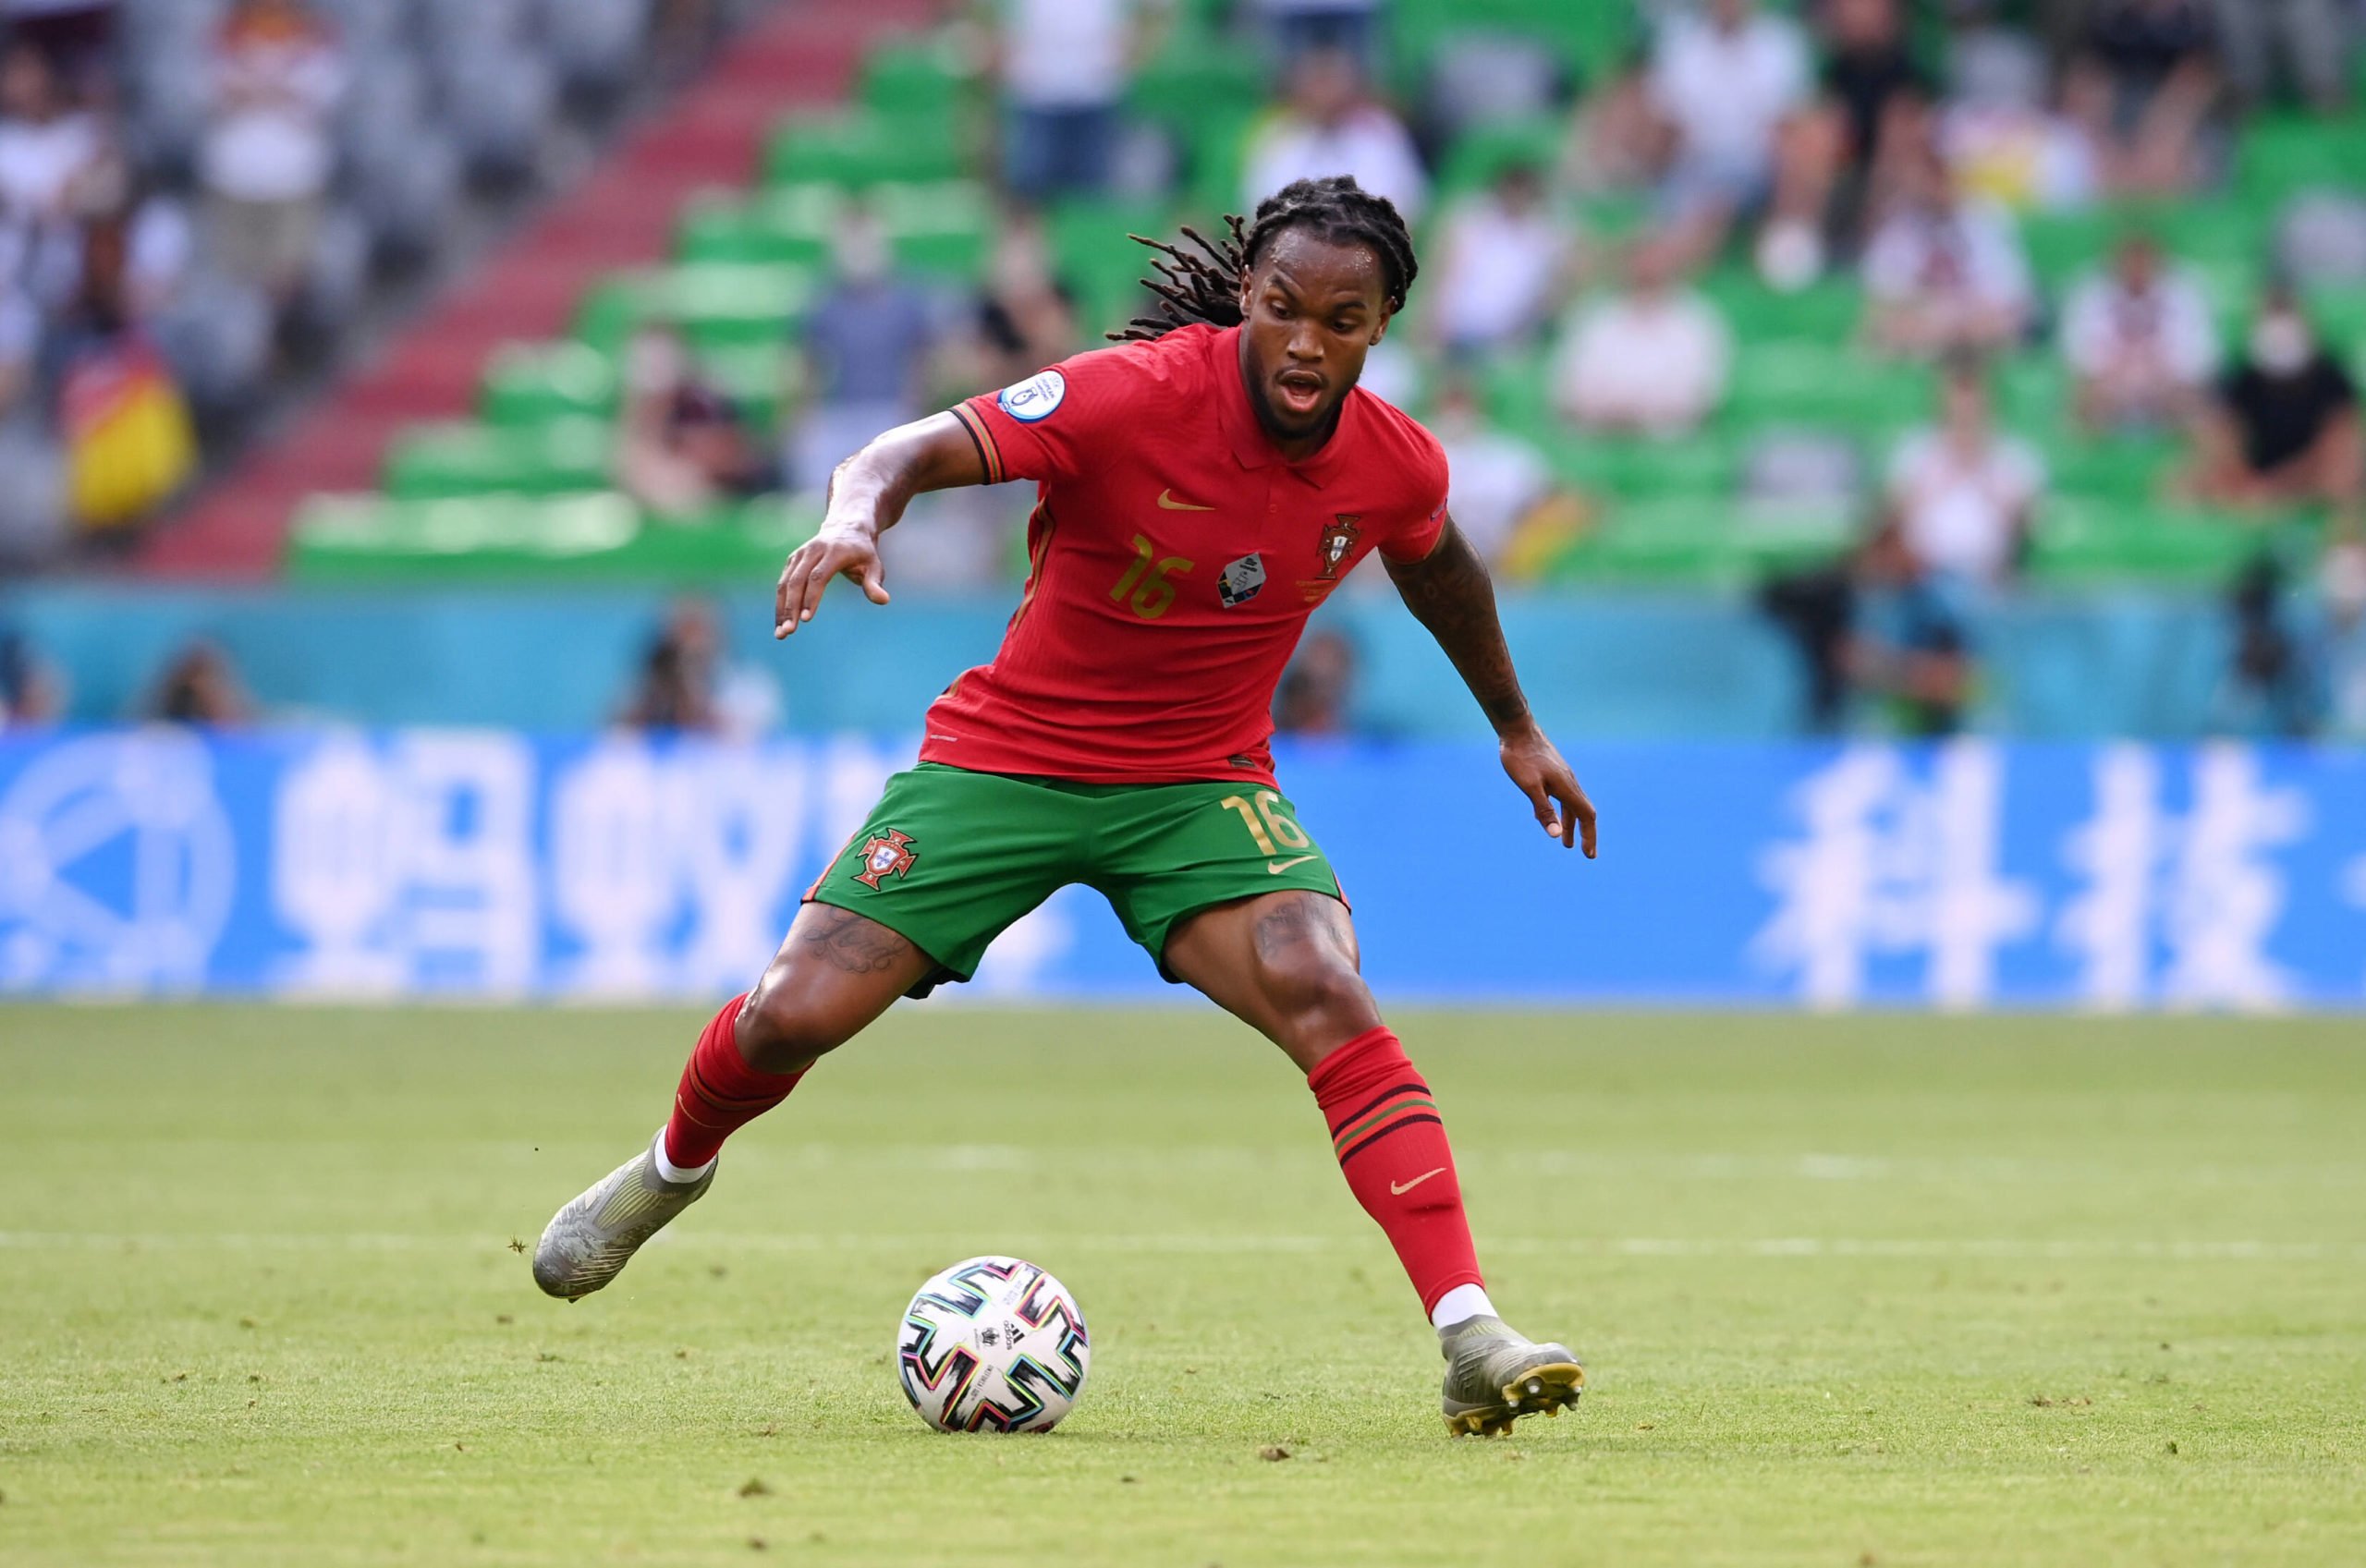 Renato Sanches could join Liverpool this summer (Renato Sanches is seen in the picture)